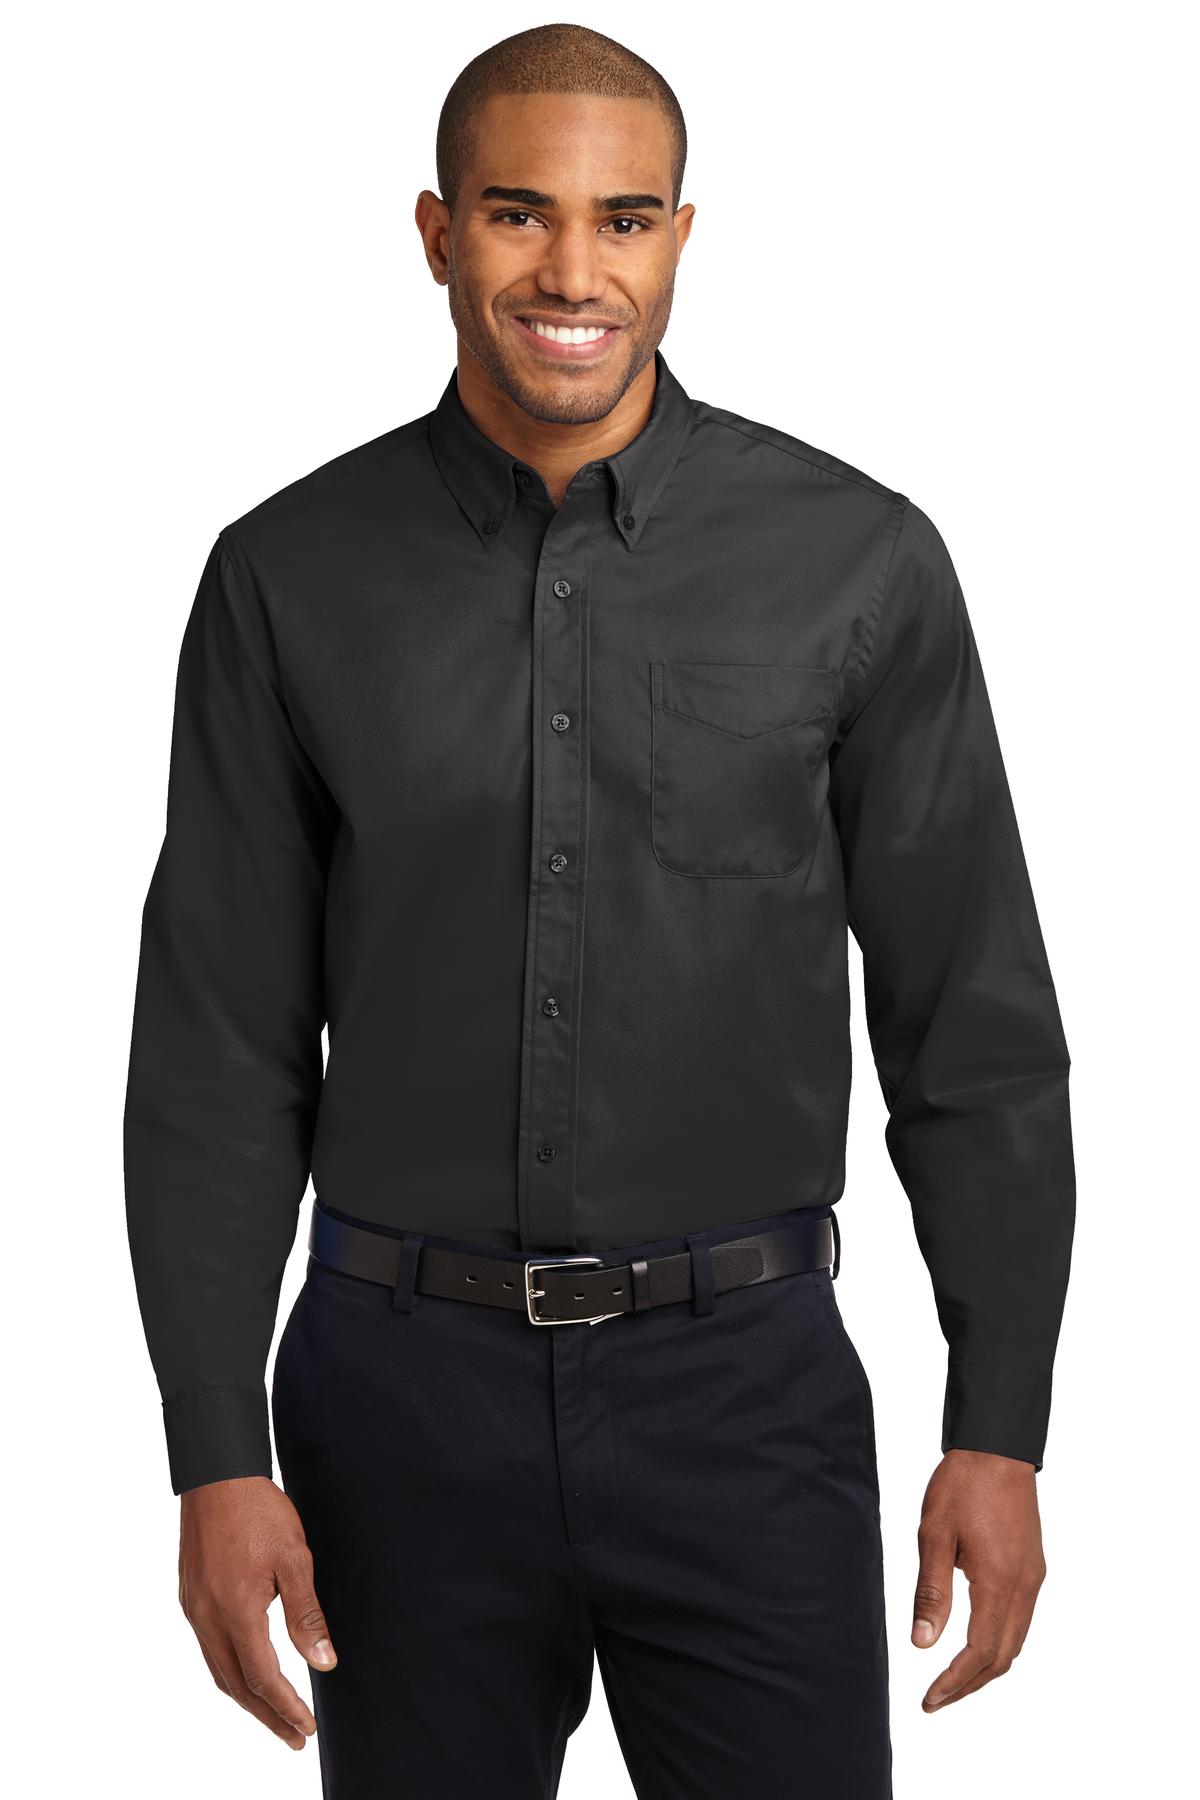 Port Authority Woven Shirts for Hospitality ® Long Sleeve Easy Care Shirt.-Port Authority